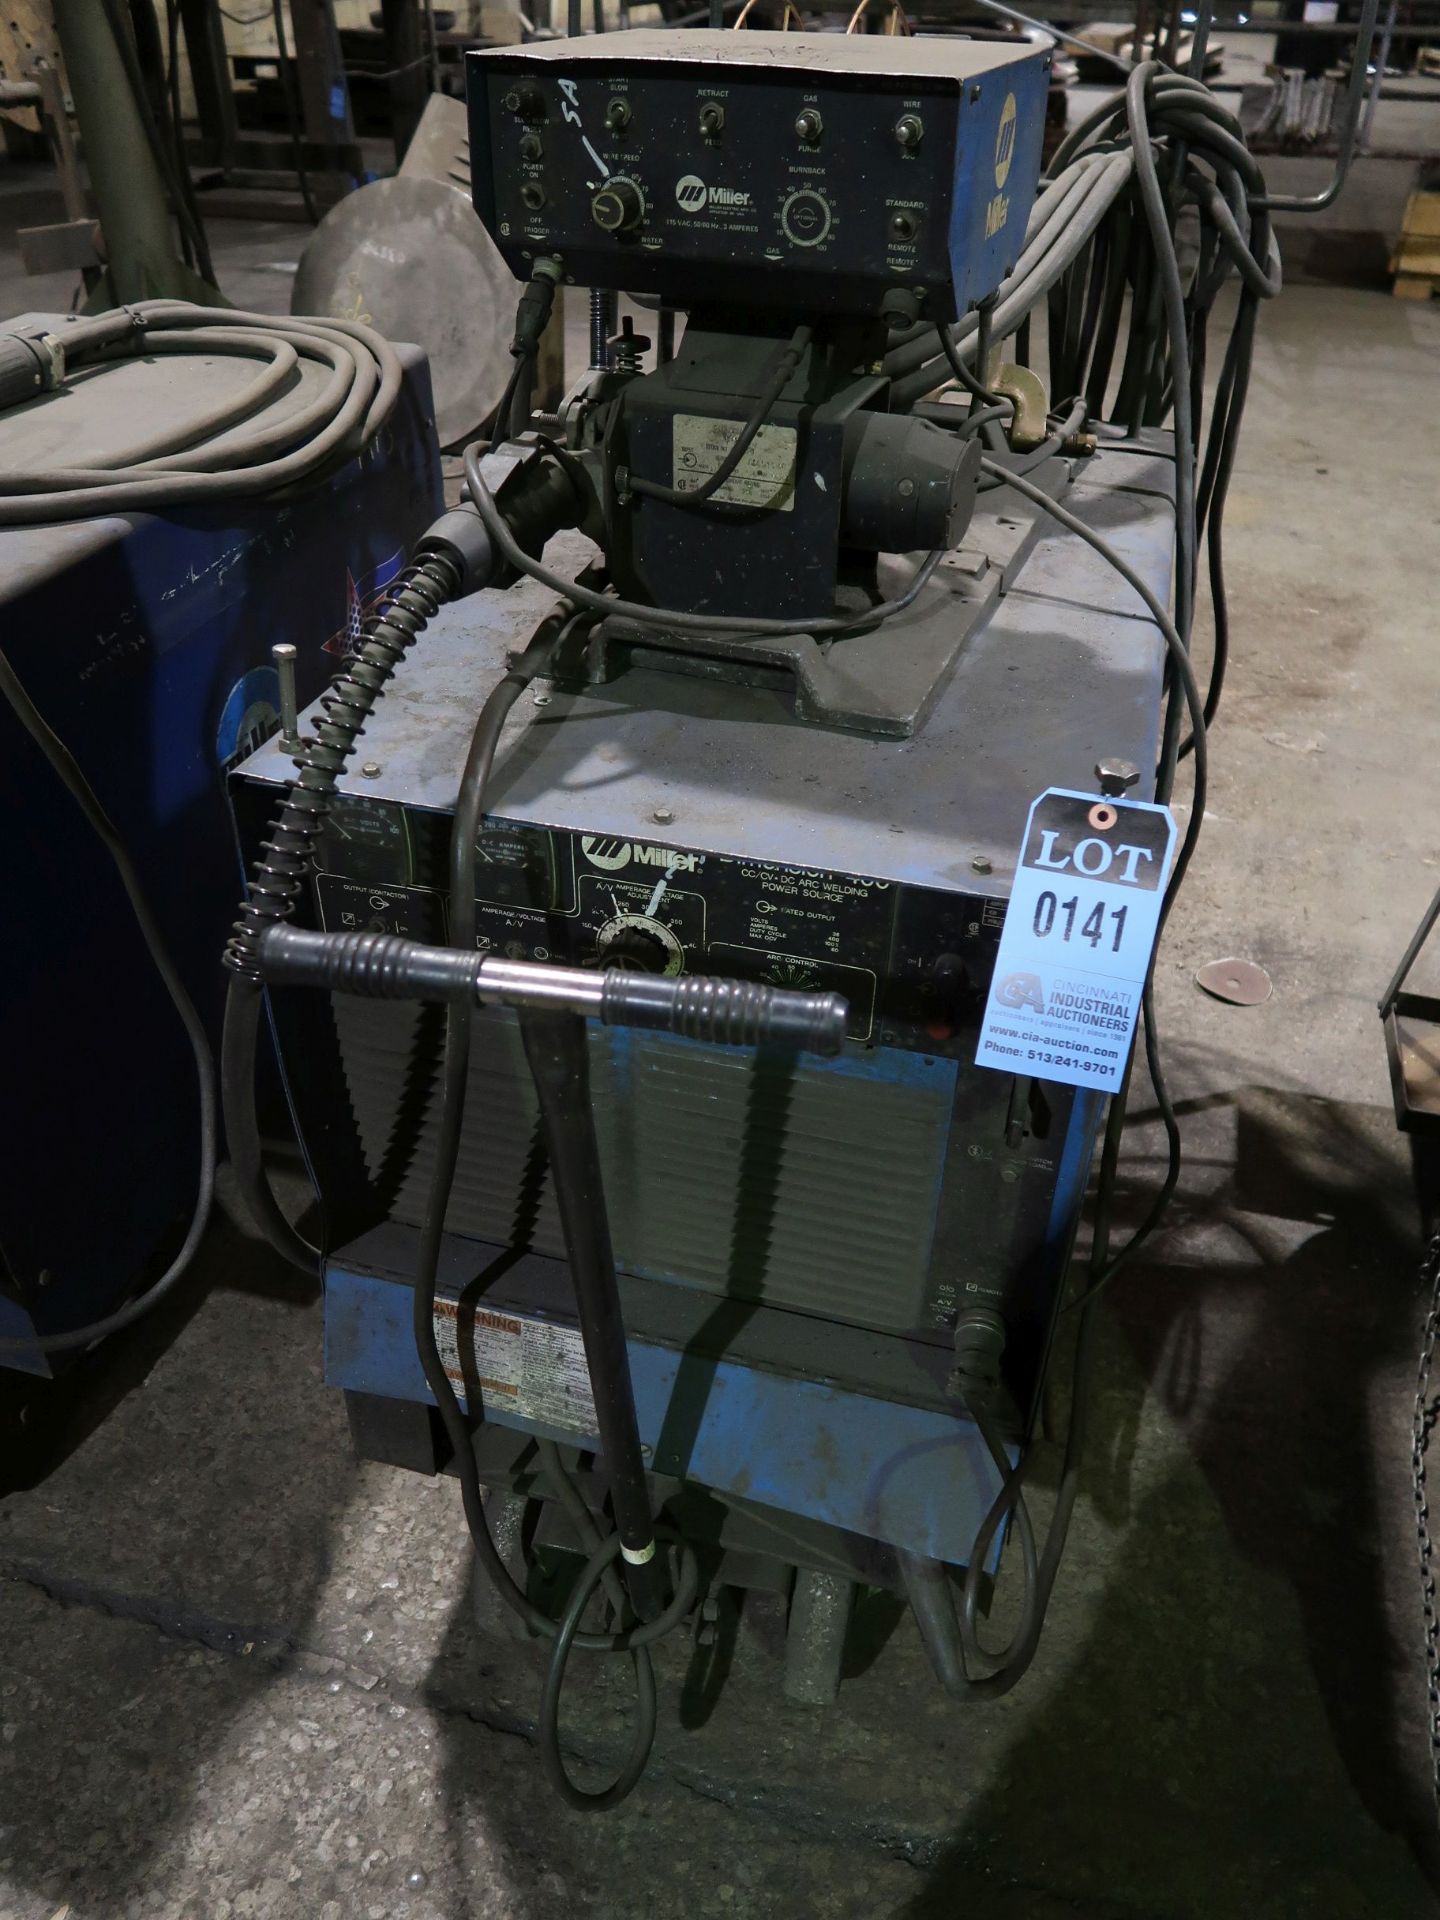 MILLER DIMENSION 400 WELDER WITH S-52A WIRE FEED